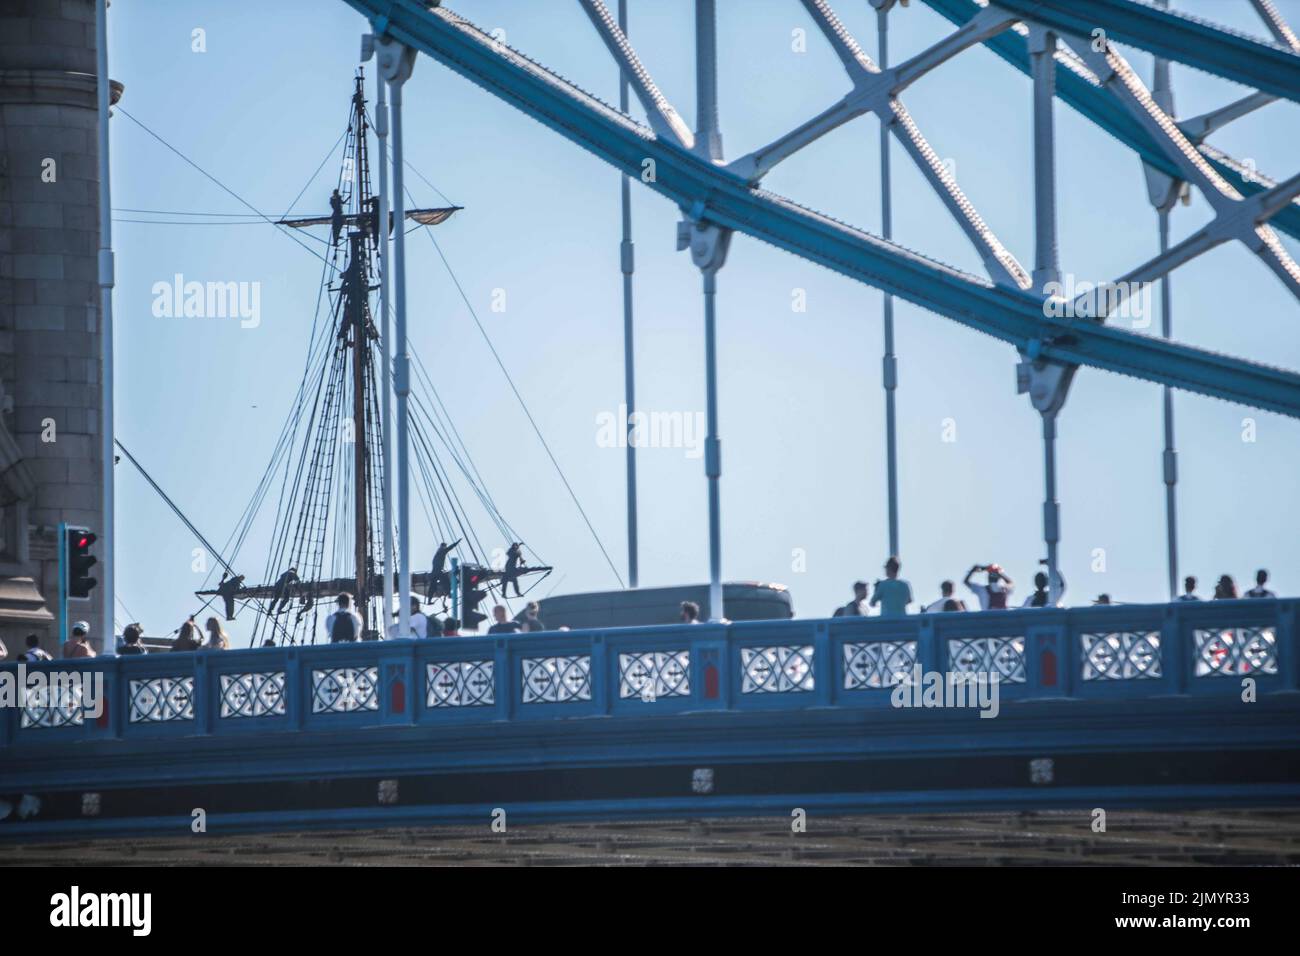 London UK 8 August 2022 Sailors wave to the crowds who gathered in Tower Bridge , to see  The world's largest ocean-going wooden sailing ship passed through the elevated Tower Bridge,  Paul Quezada-Neiman/Alamy Live News Stock Photo